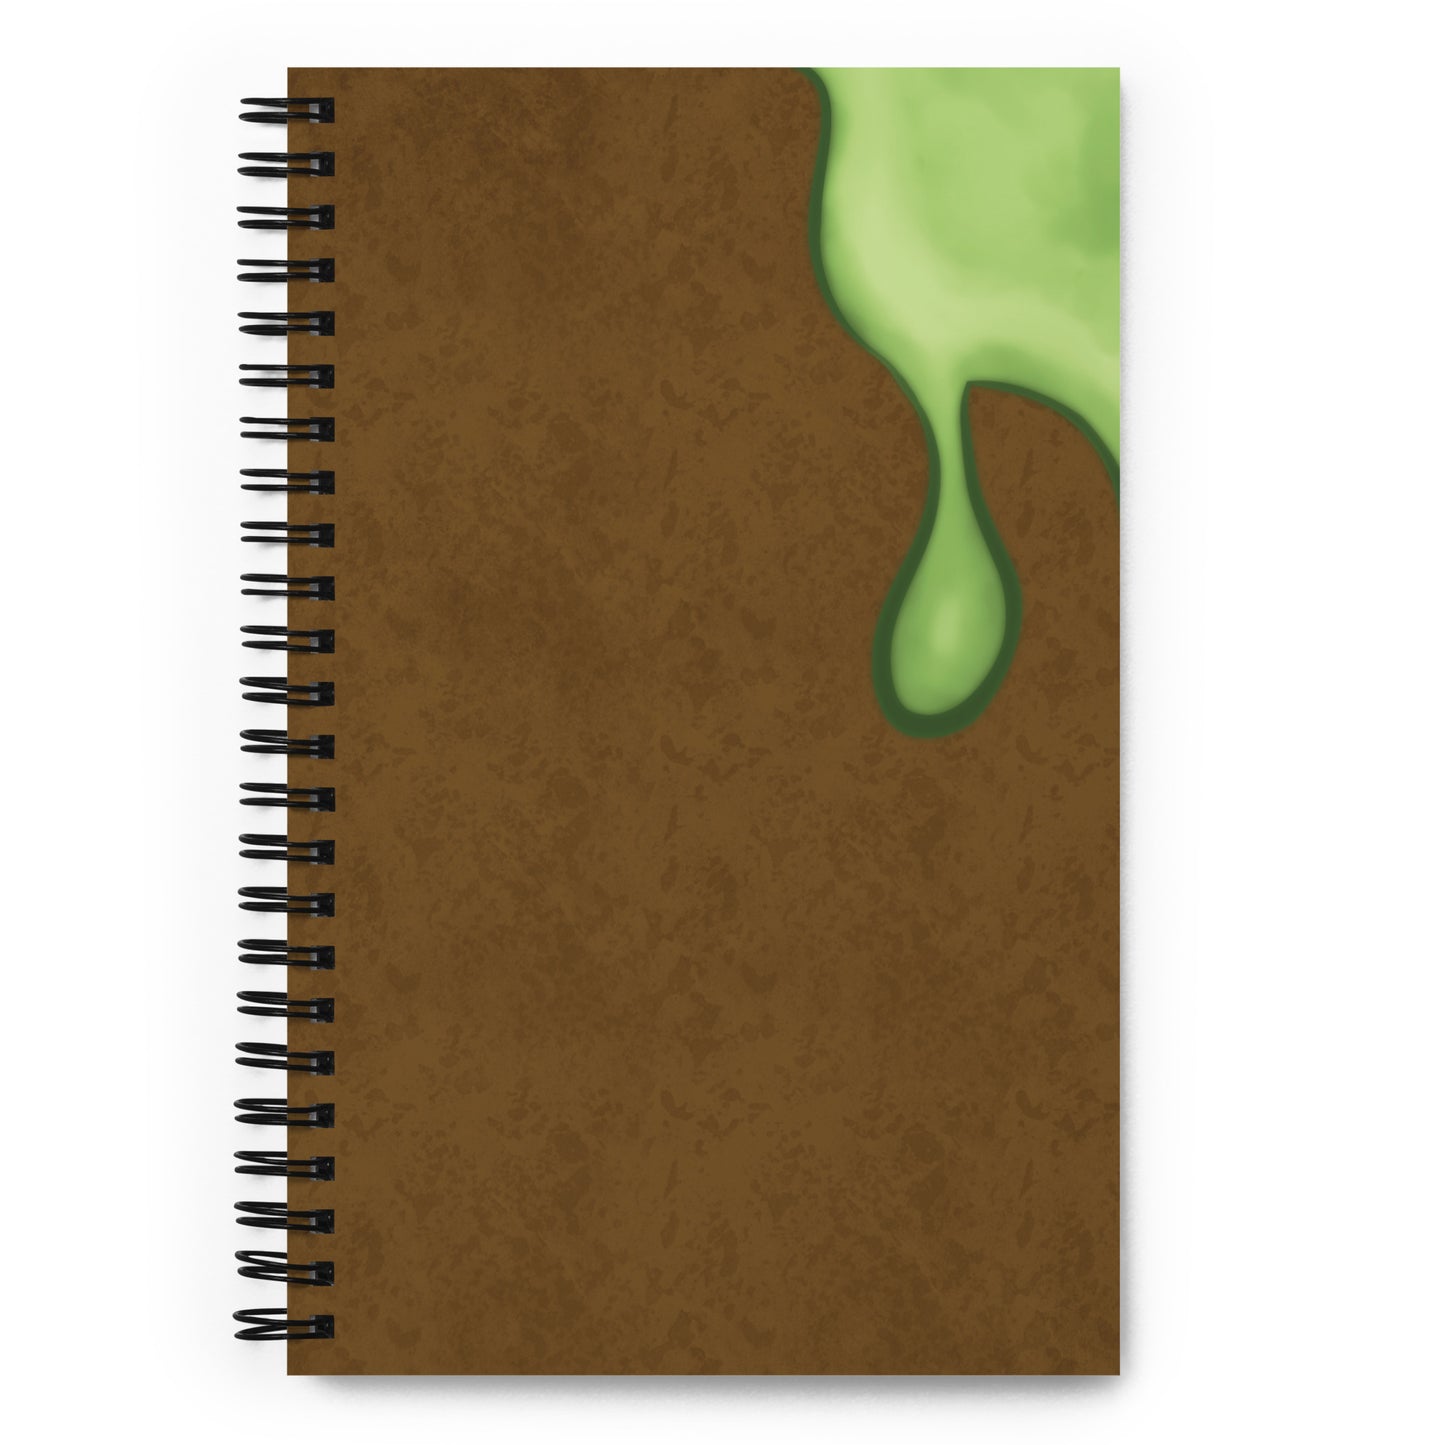 A spiral notebook with a brown tonal texture and a green slime blob illustration on one side with 3 dimensional shading.